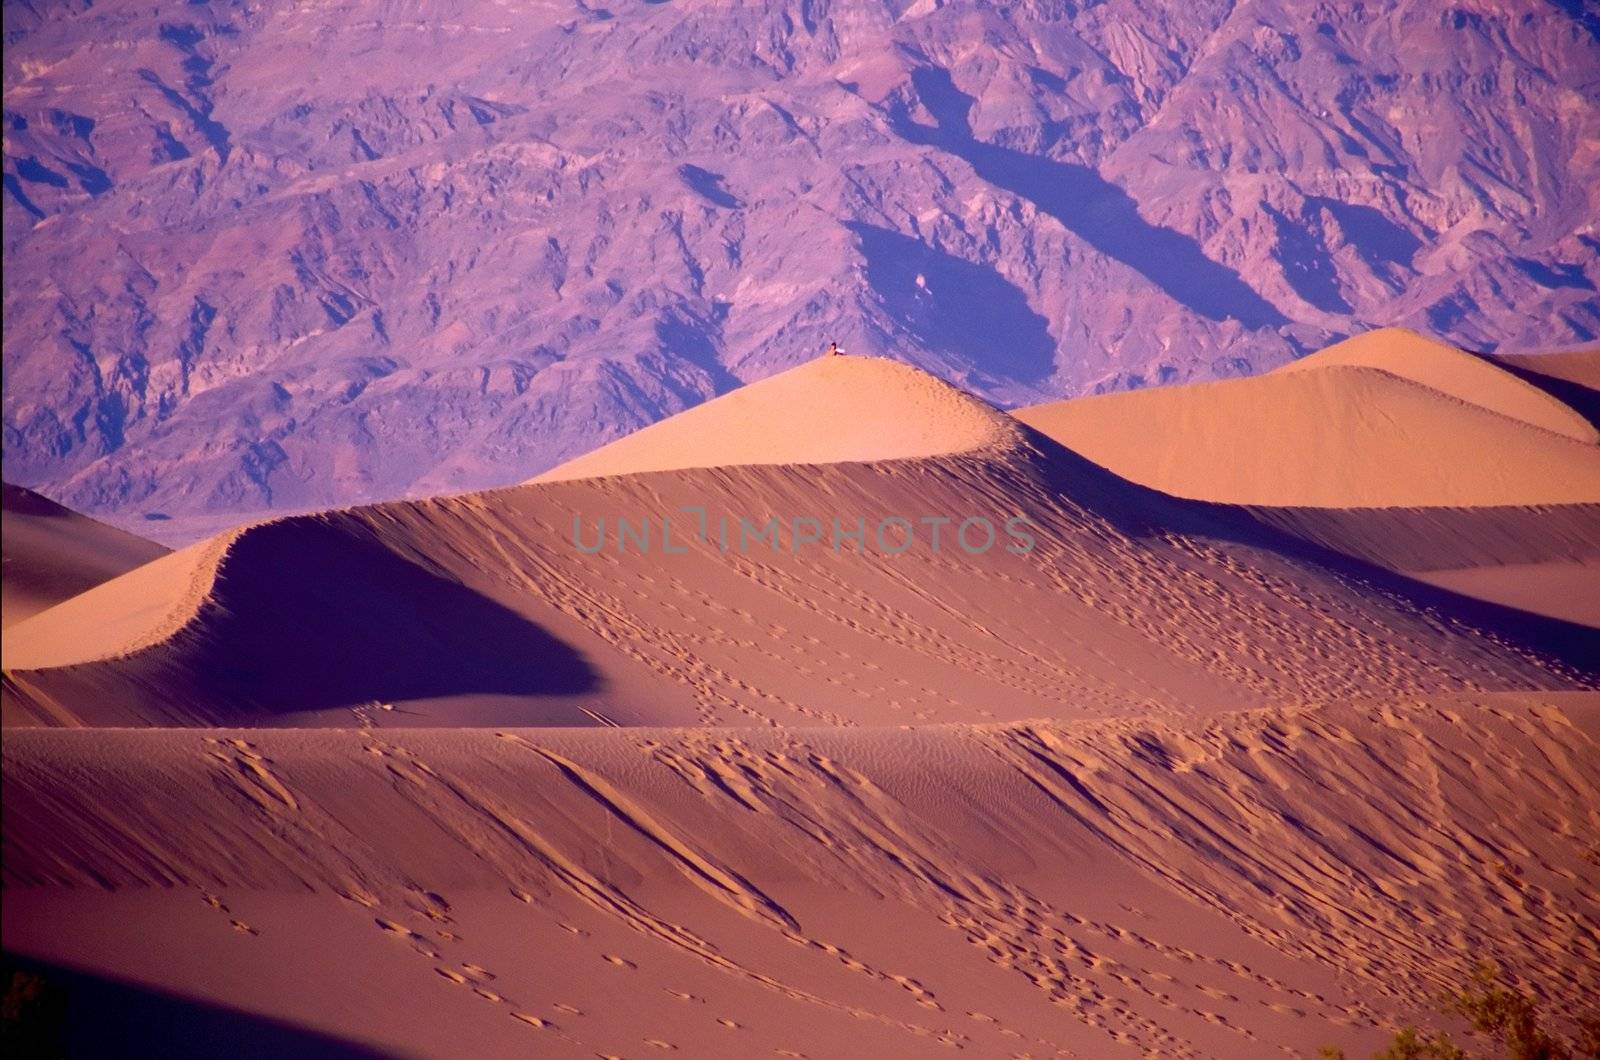 Death Valley is the lowest, driest and hottest valley in the United states. It is the location of the lowest elevation in Western hemisphere